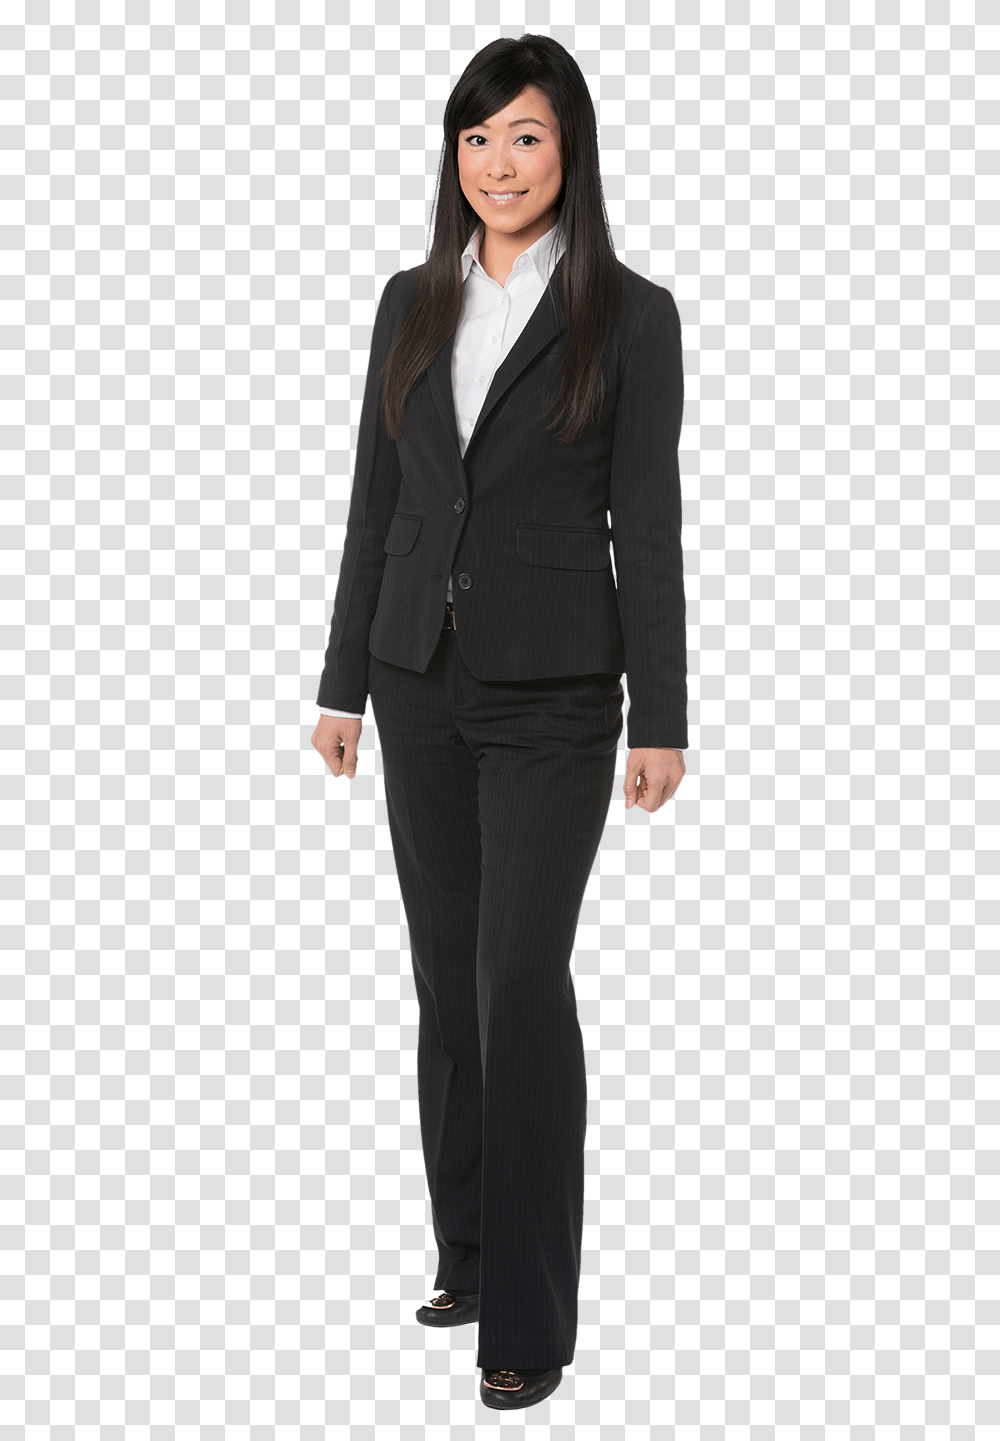 Whole Body Formal Attire Download Woman Lawyer Full Body, Suit, Overcoat, Tuxedo Transparent Png